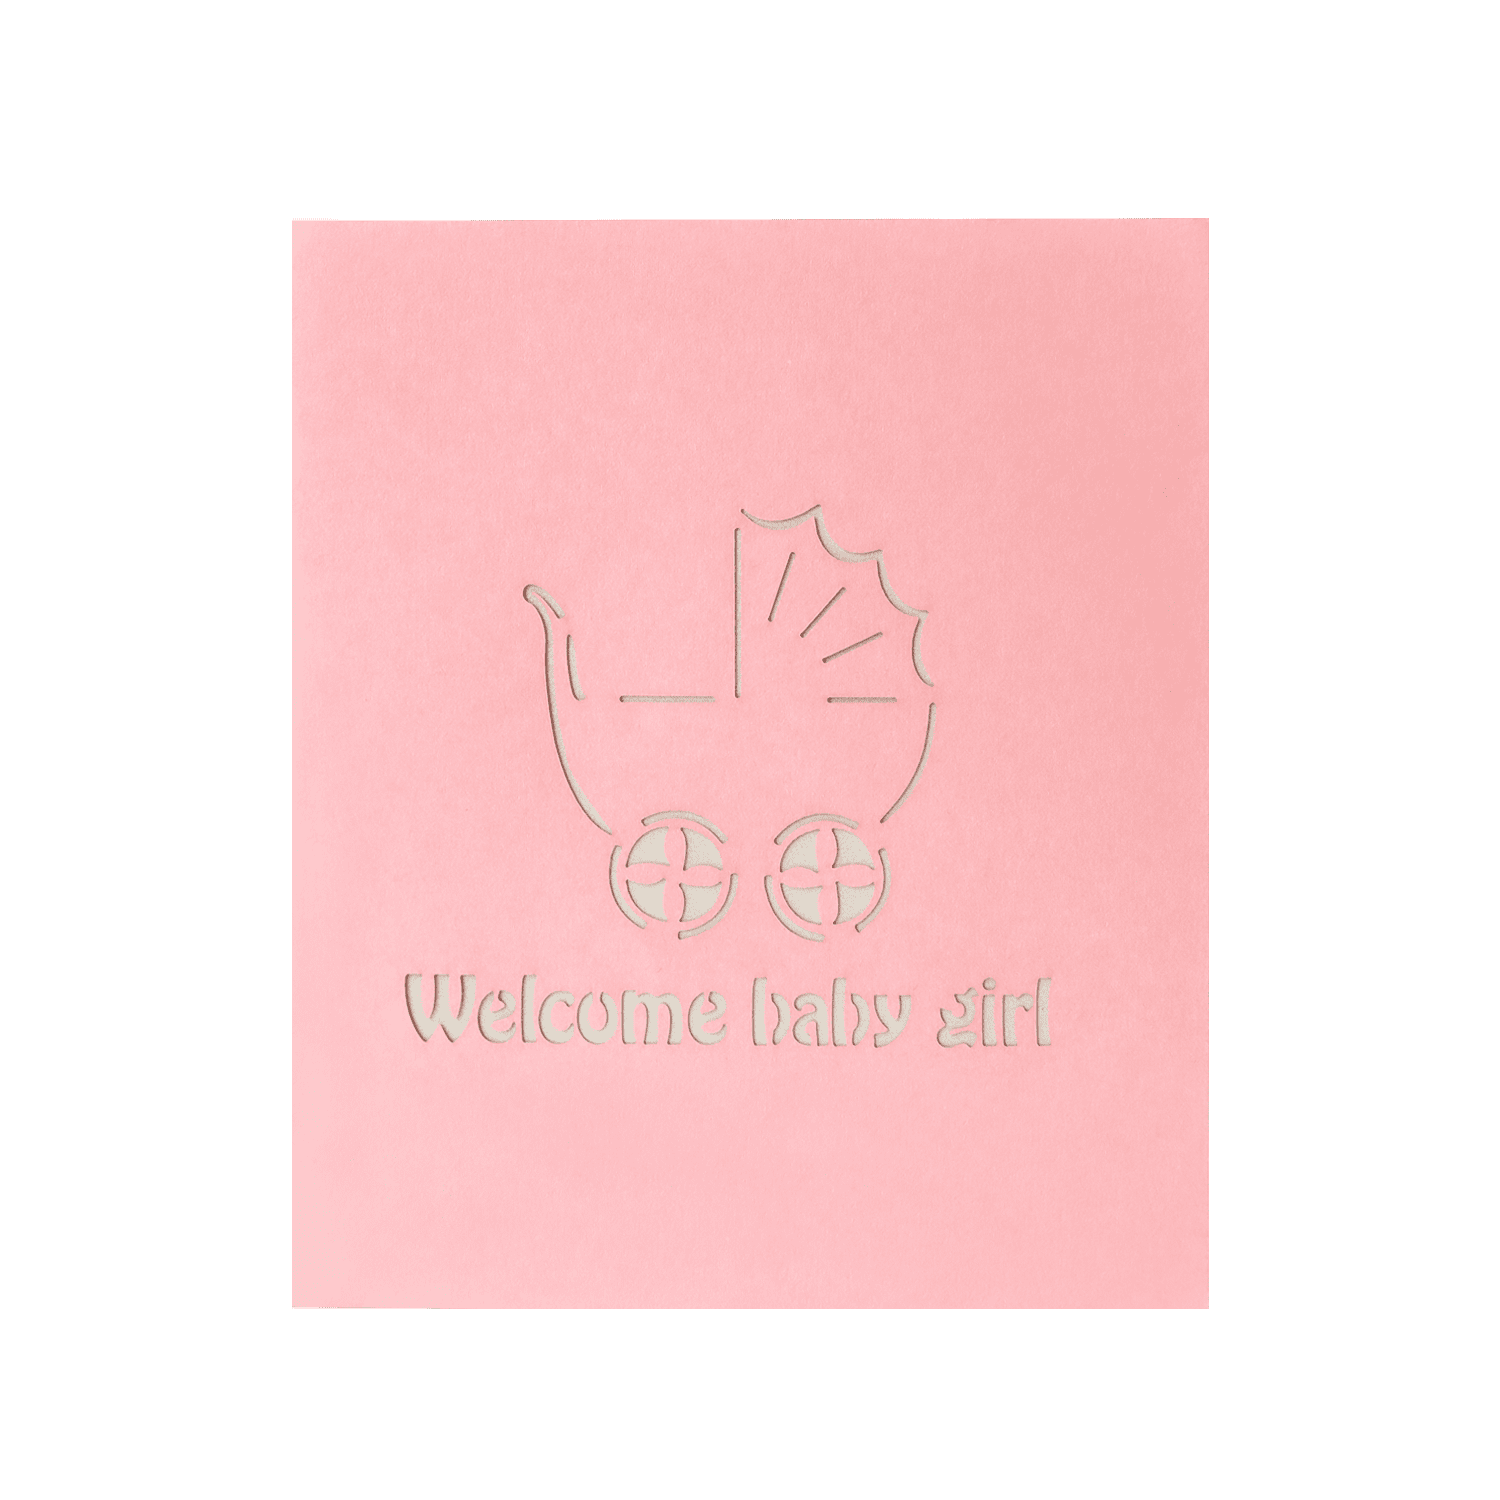 Welcome baby girl pop up cover